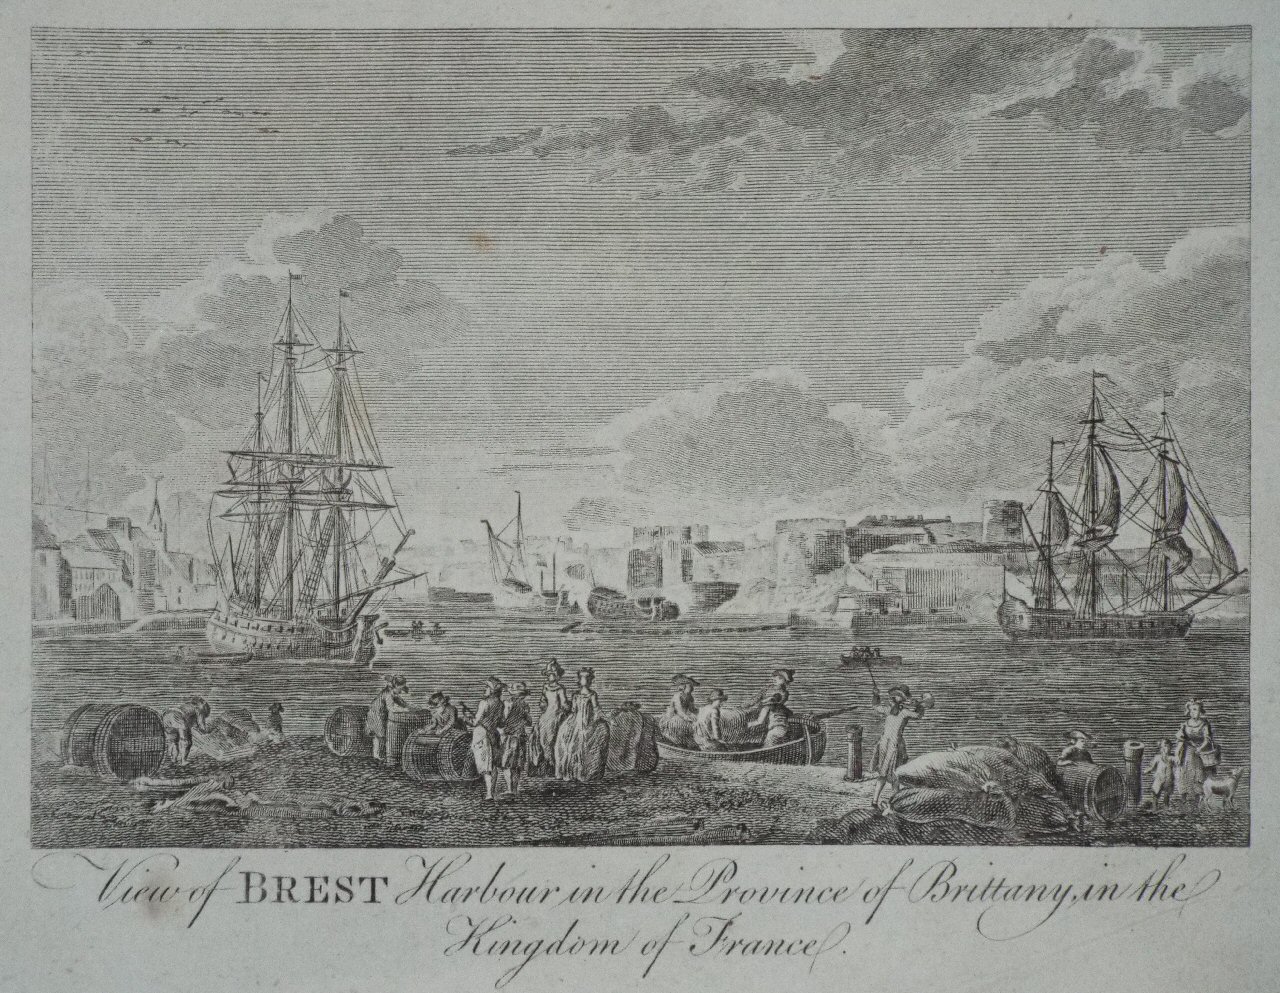 Print - View of Brest Harbour in the Province of Brittany, in the Kingdom of France.